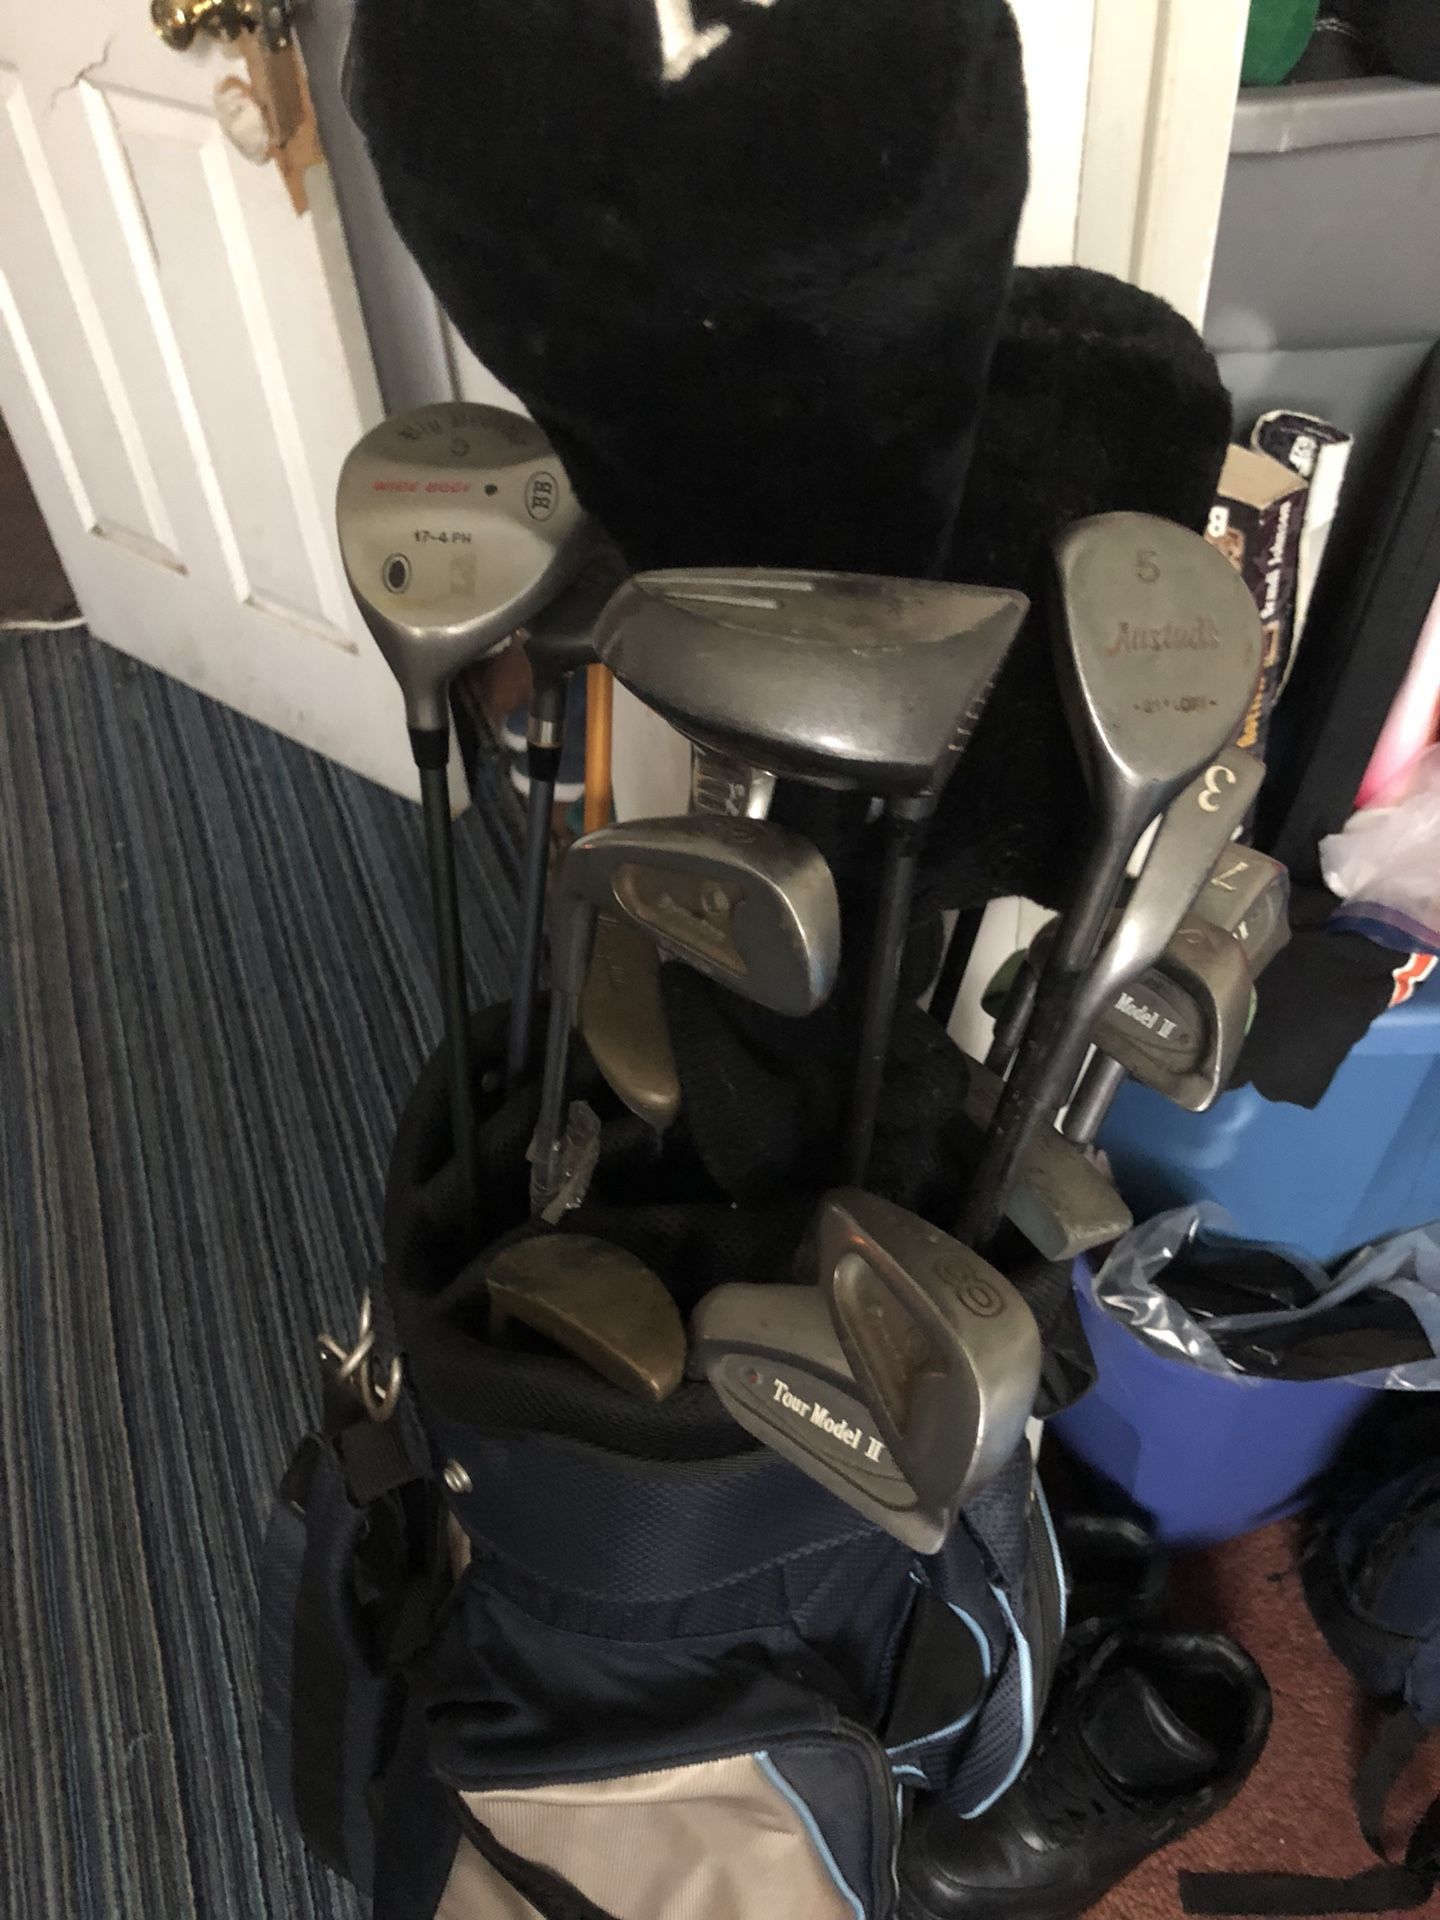 Golfclub set of 17 clubs sizes vary